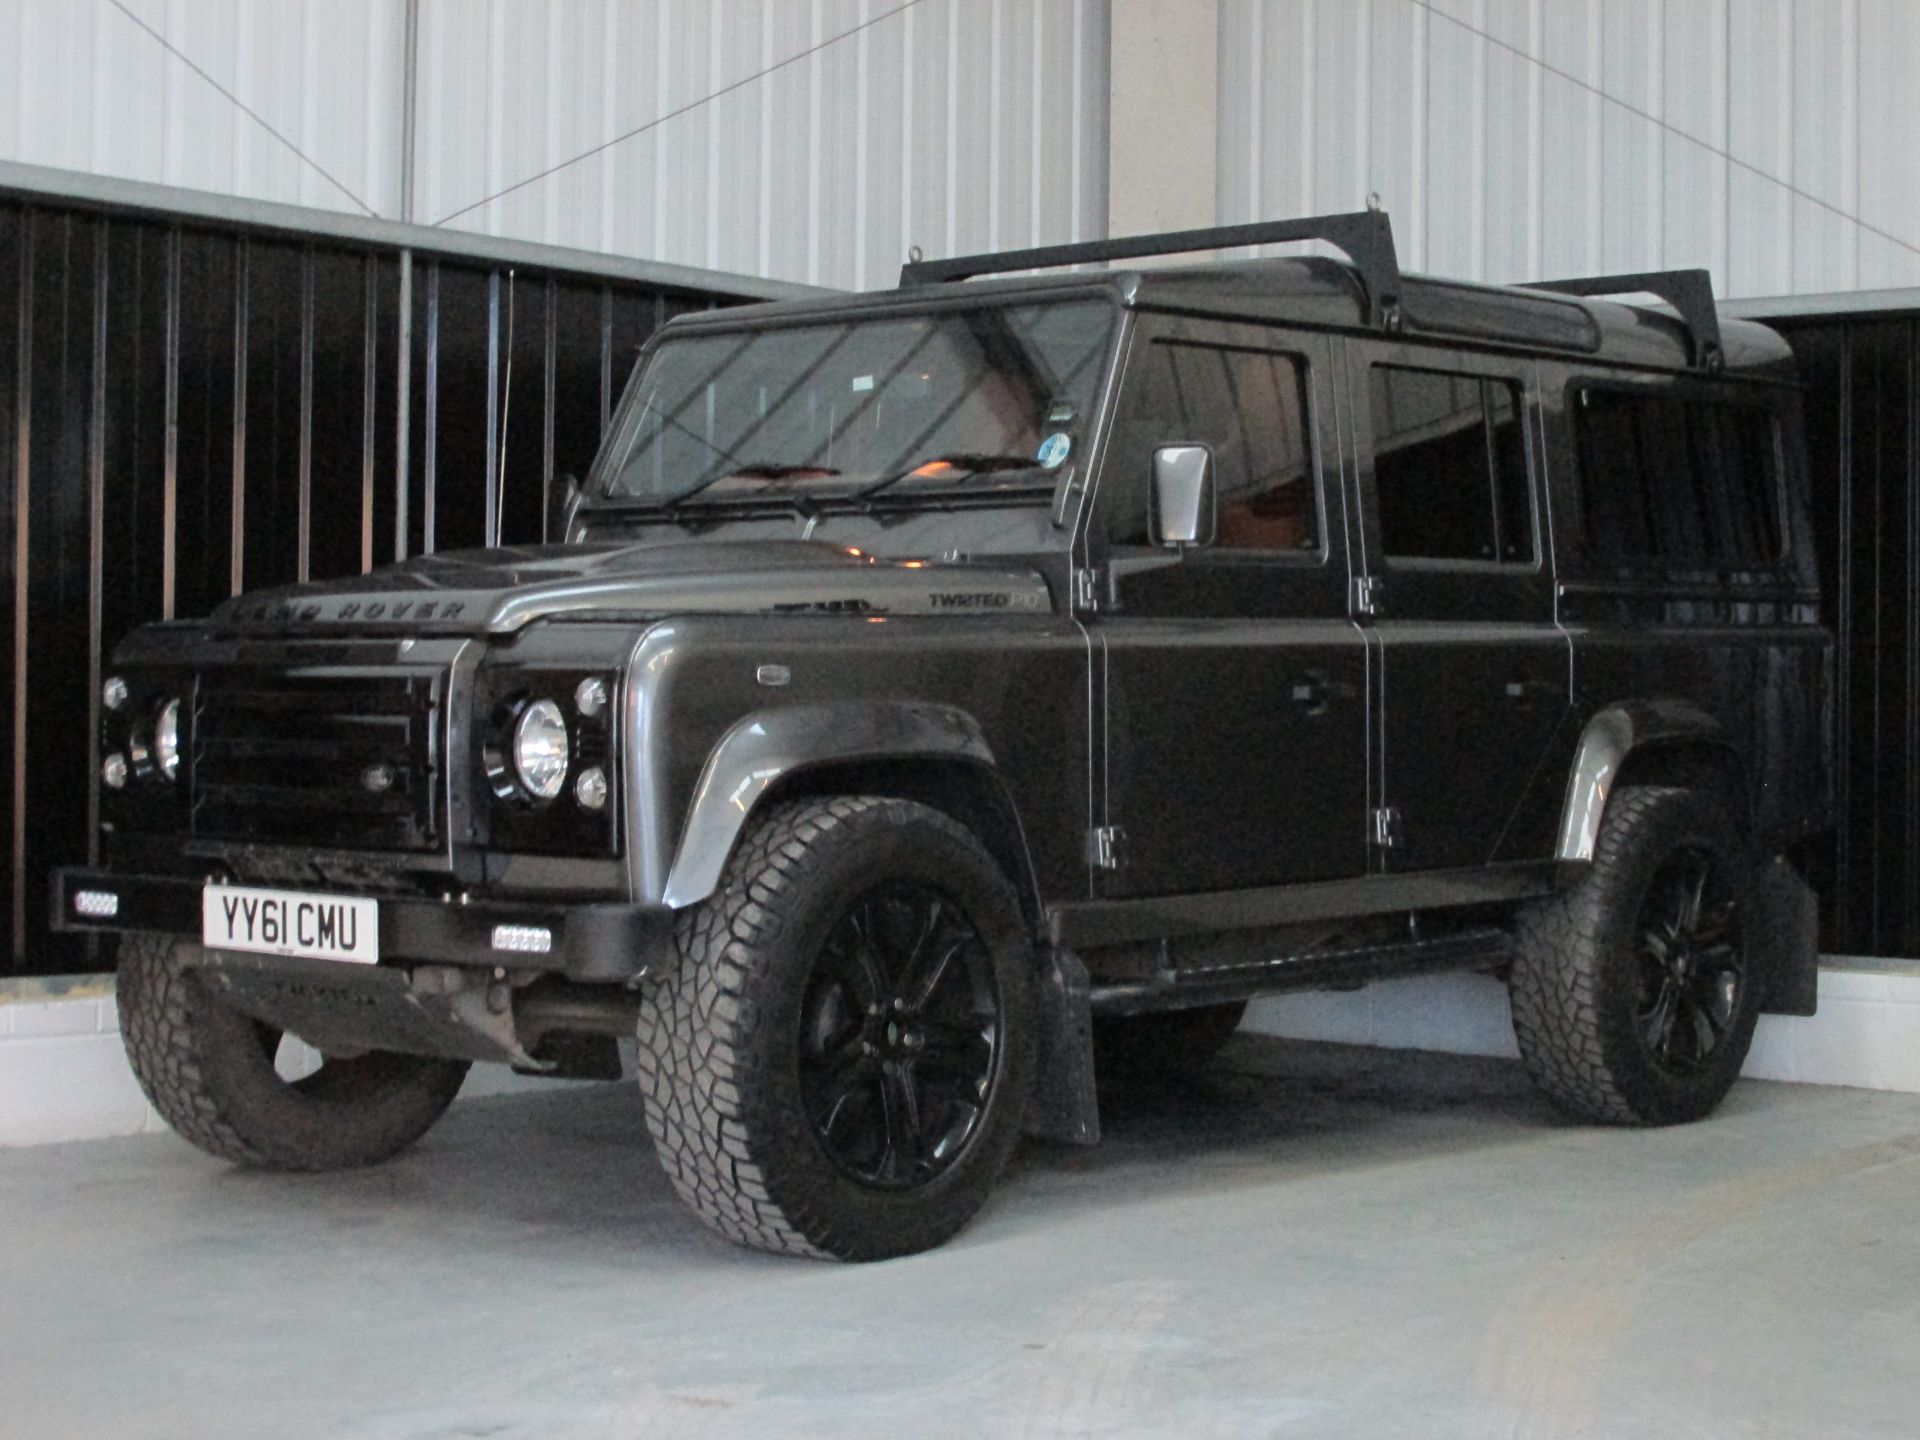 'TWISTED' - Rare Land Rover Defender Genuine PS 10 Built by Twisted Yorkshire